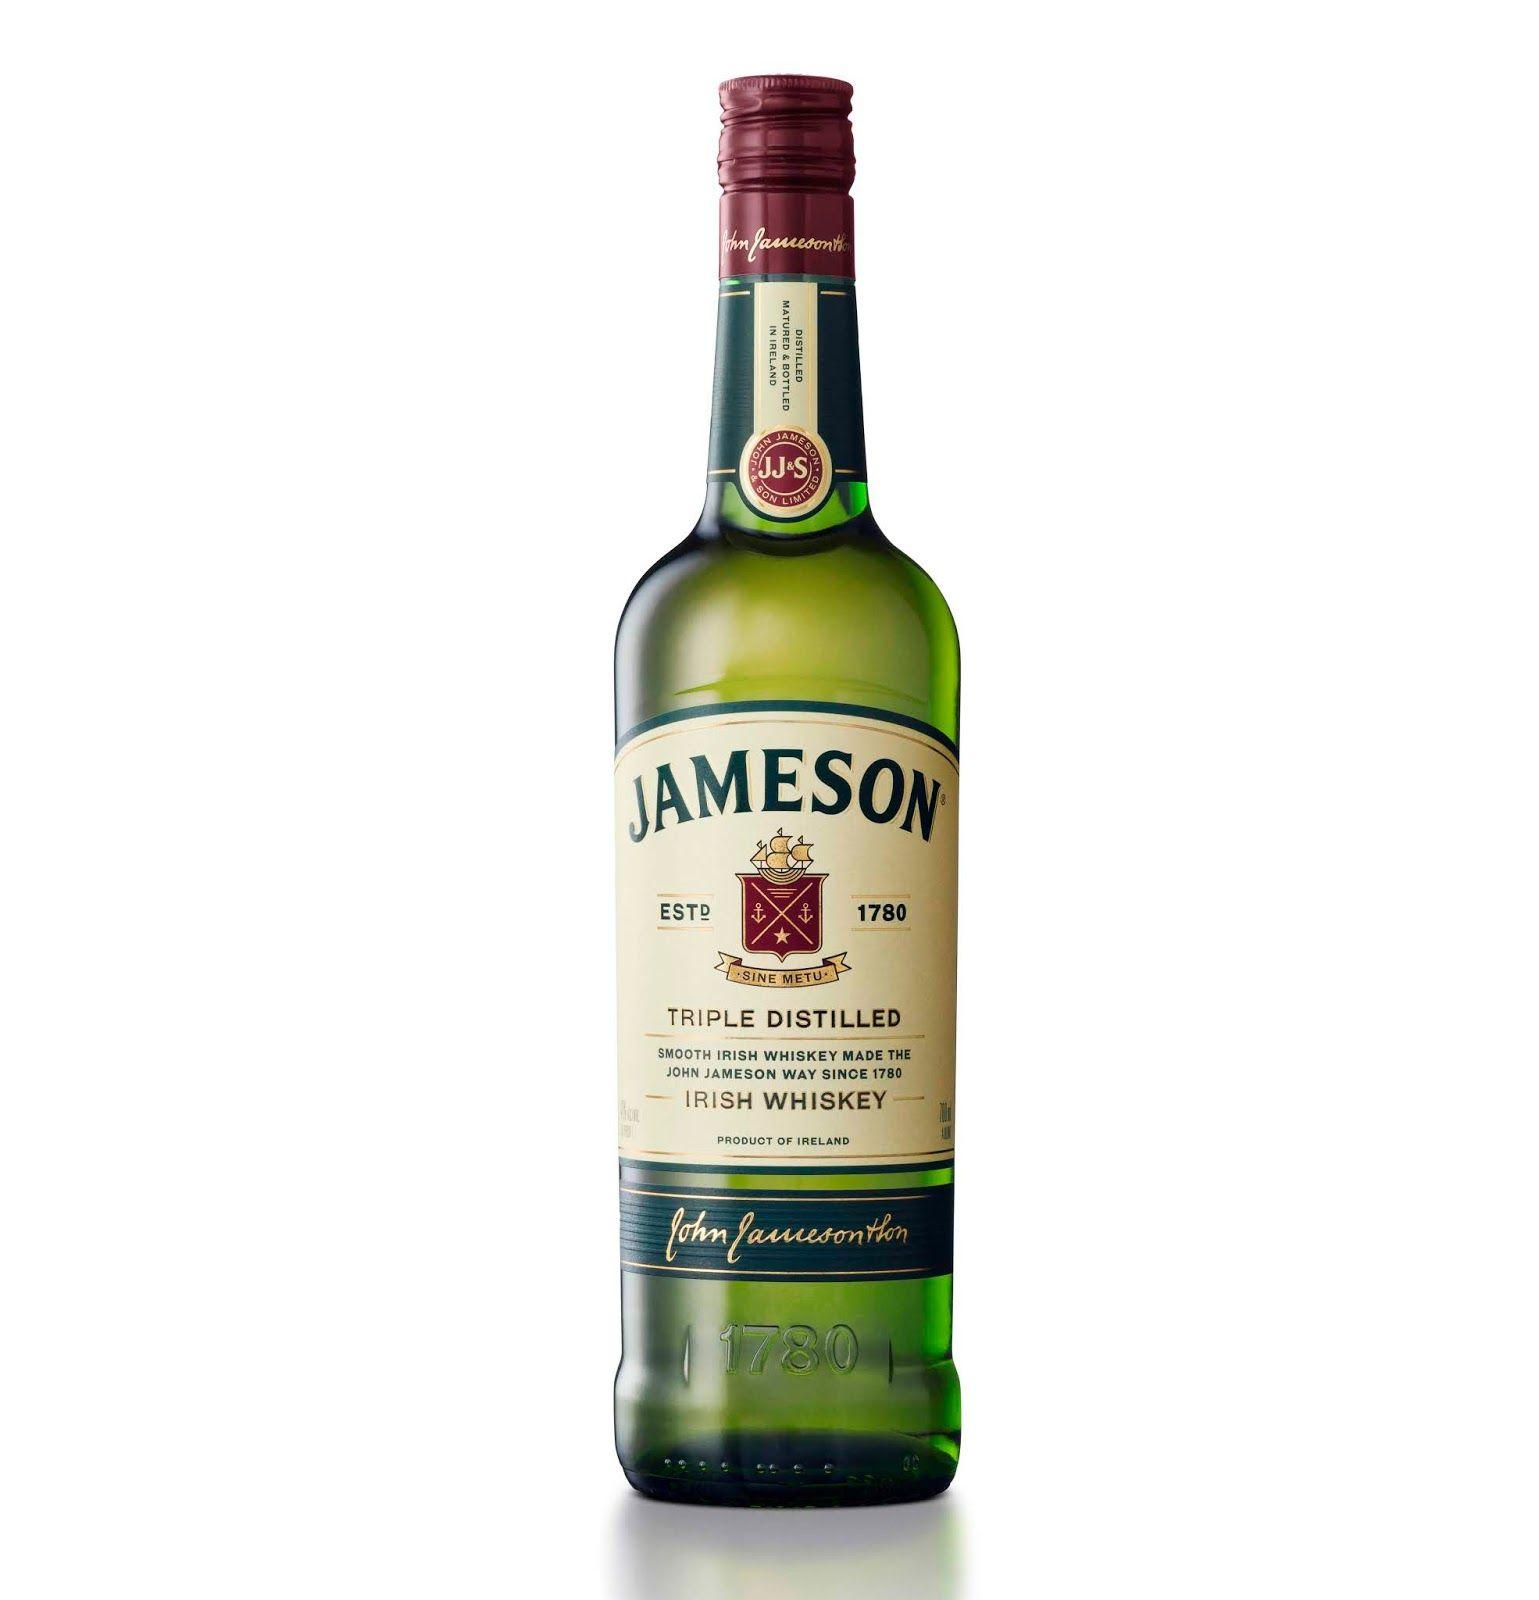 New Bacardi Bottle Logo - The Whisky Business: JAMESON LAUNCHES NEW BOTTLE AND LABEL DESIGN